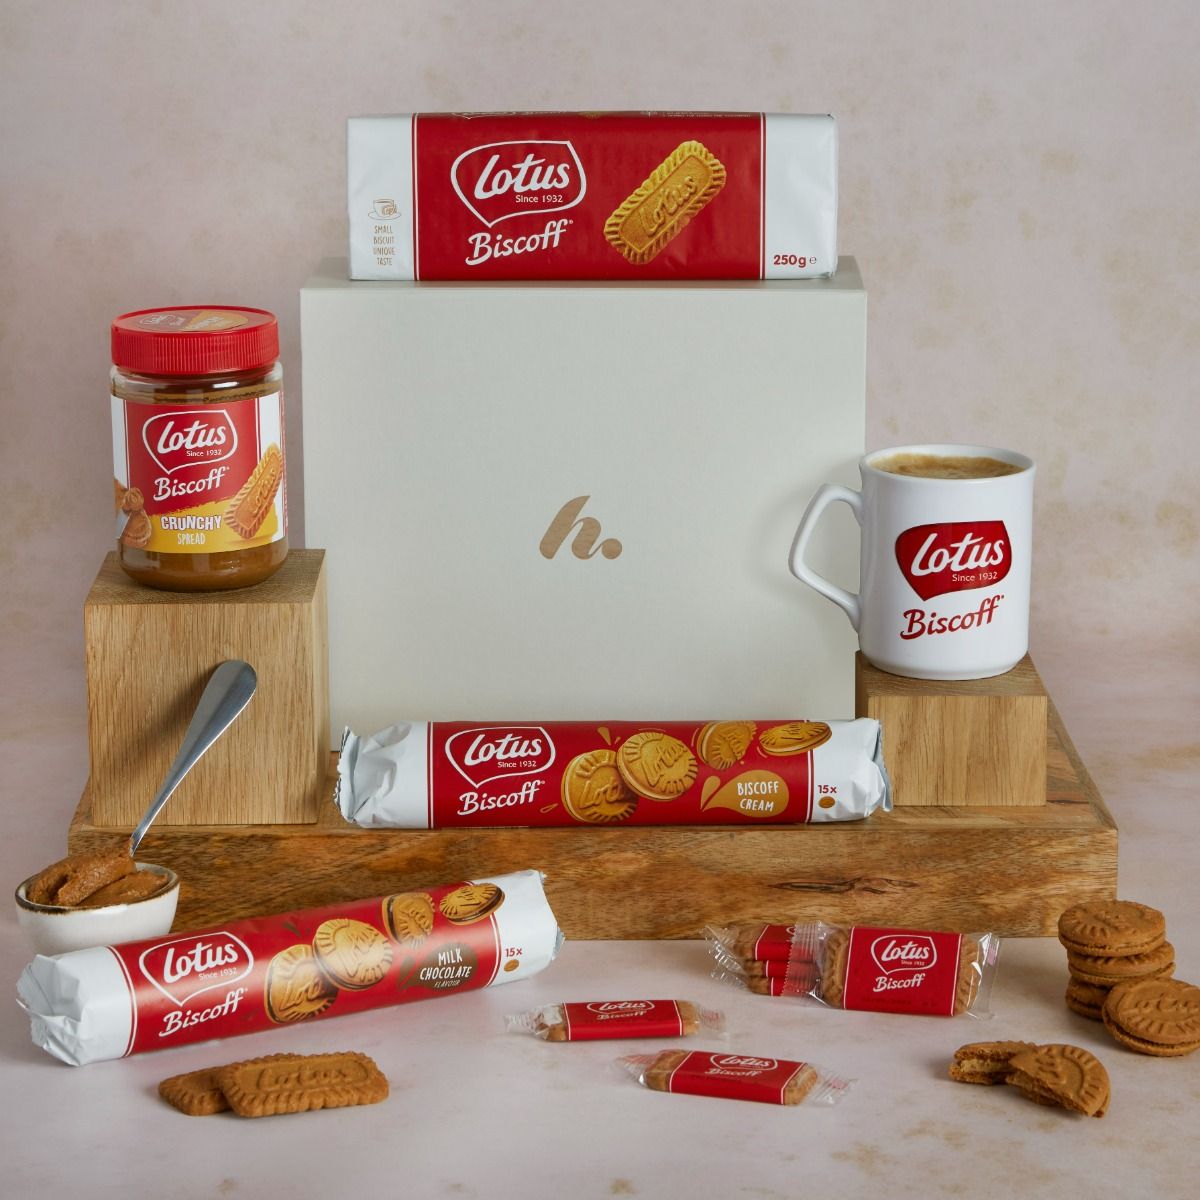 Lotus Biscoff Coffee Break Gift Box with contents on display